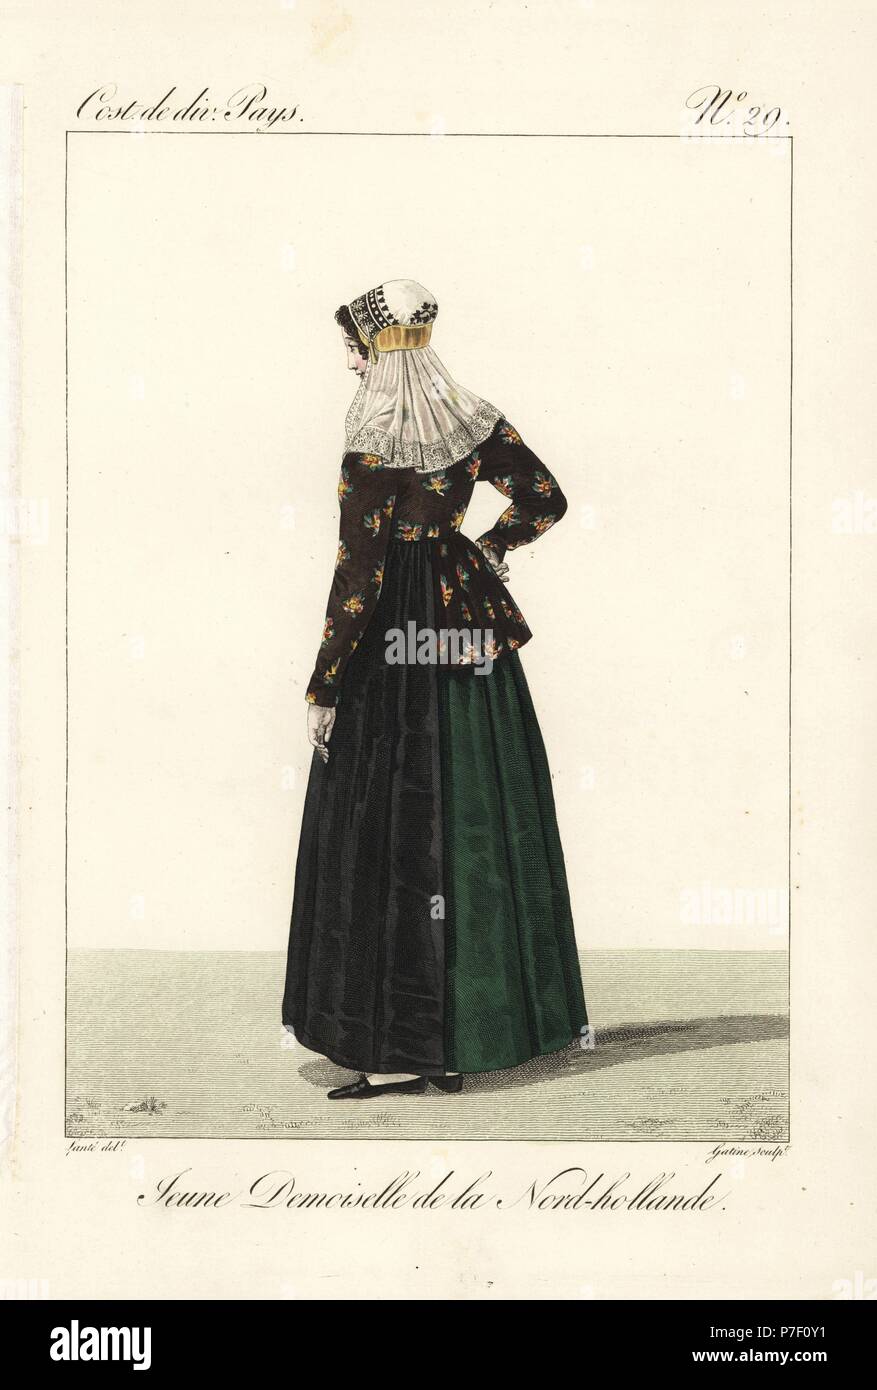 https://c8.alamy.com/comp/P7F0Y1/young-girl-of-north-holland-netherlands-19th-century-in-distinctive-embroidered-cap-with-gold-plate-called-a-willow-leaf-above-a-veil-floral-cotton-camisole-silk-apron-and-skirt-handcoloured-copperplate-engraving-by-georges-jacques-gatine-after-an-illustration-by-louis-marie-lante-from-costumes-of-various-countries-costumes-de-divers-pays-paris-1827-P7F0Y1.jpg